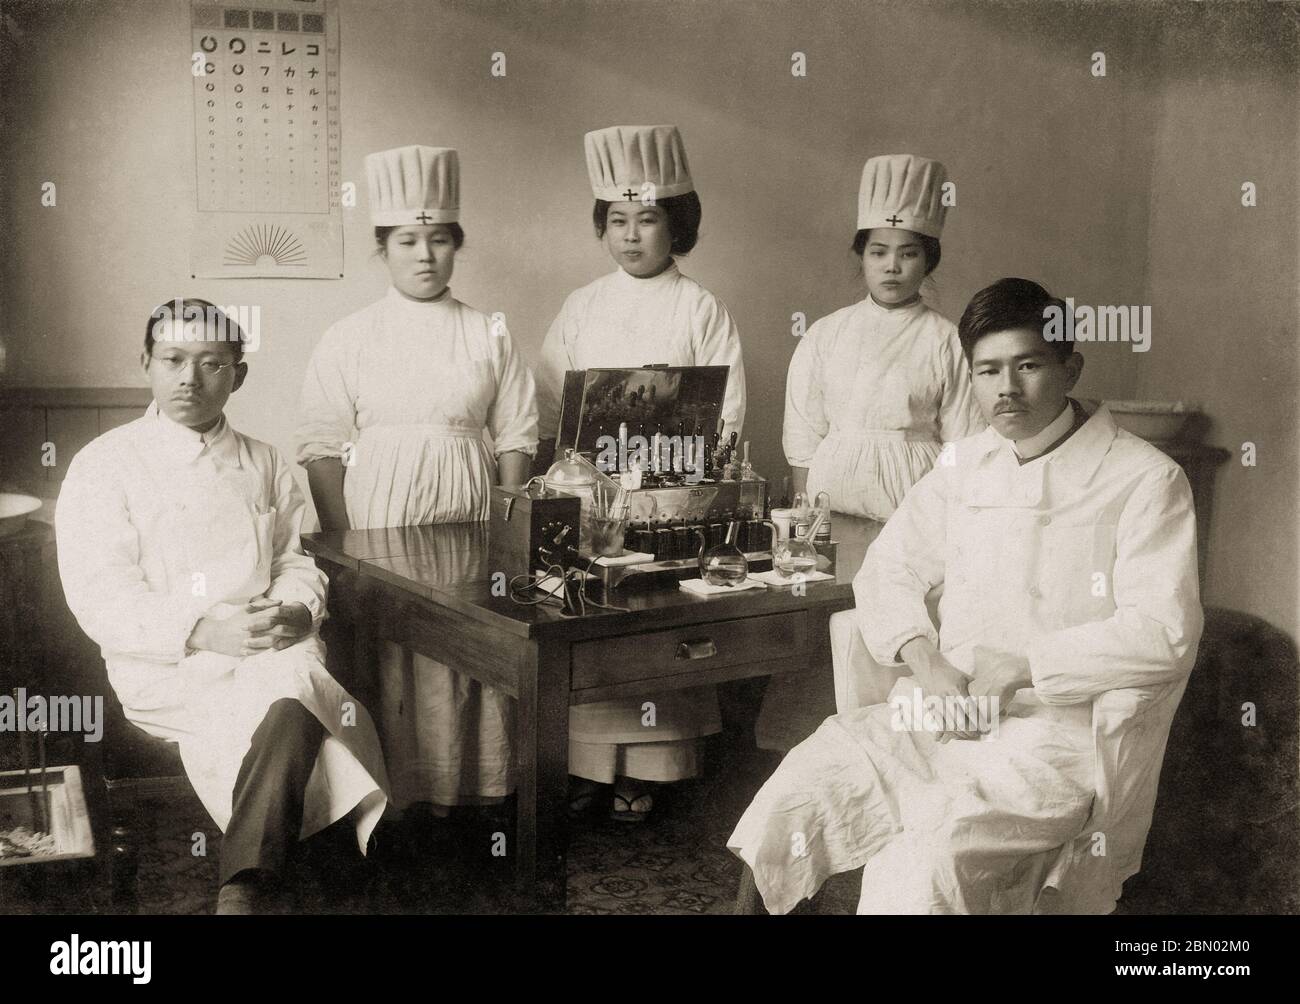 [ 1910s Japan - Japanese Doctors and Nurses ] —   Doctors and nurses posing in uniform, ca. 1910s. A Japanese eye chart hangs on the wall.  20th century gelatin silver print. Stock Photo